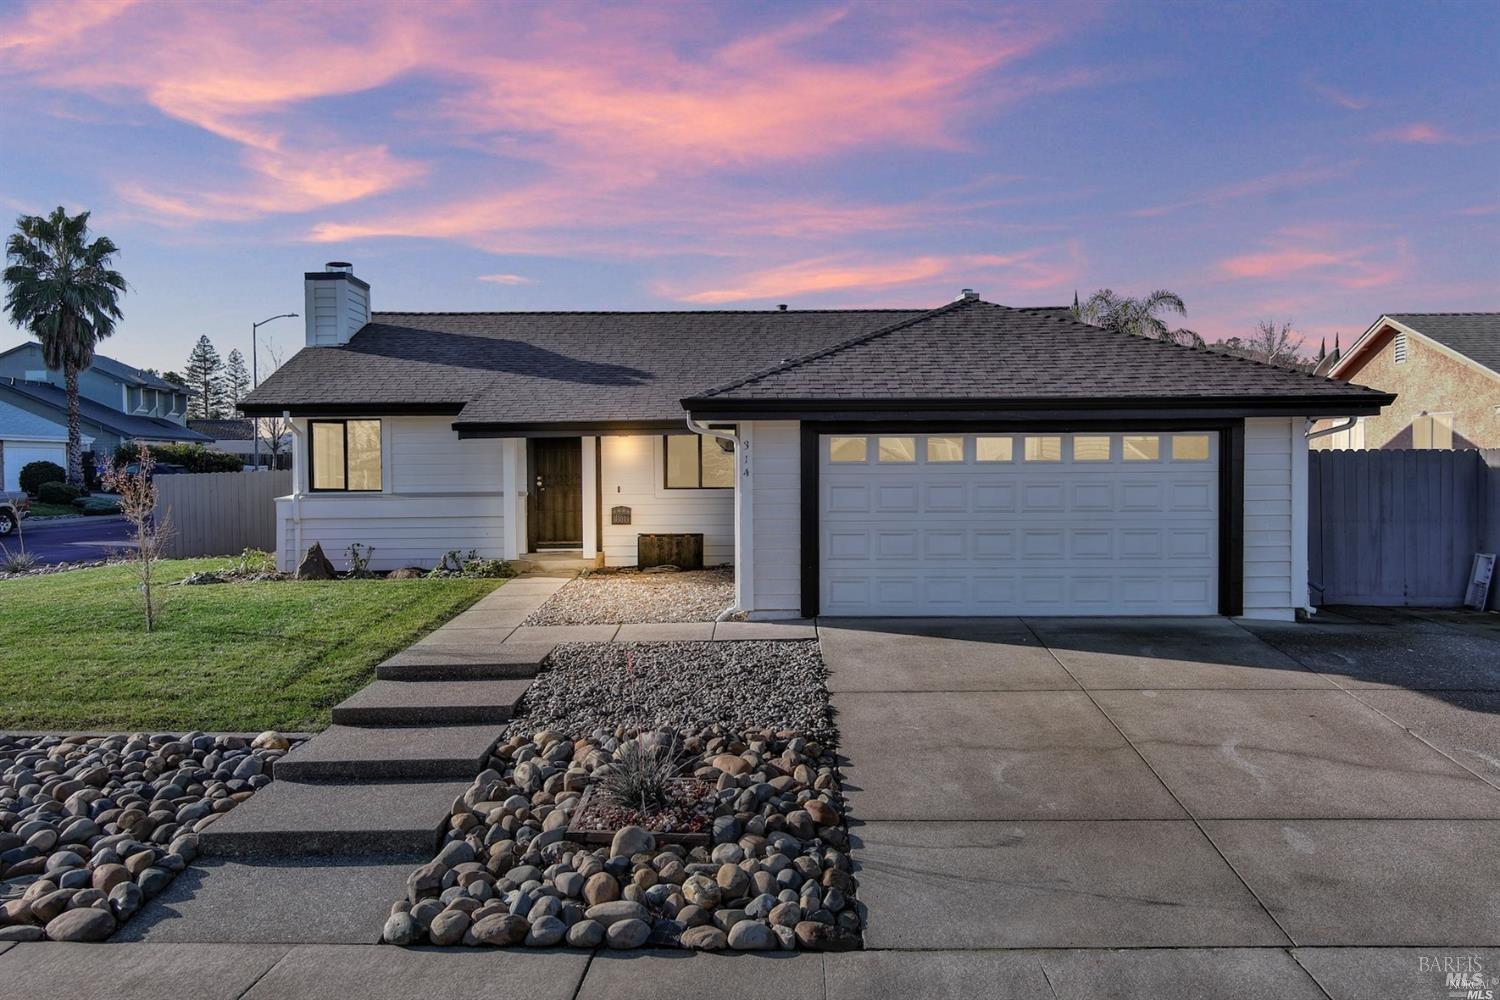 Photo of 314 Donegal Ct in Vacaville, CA